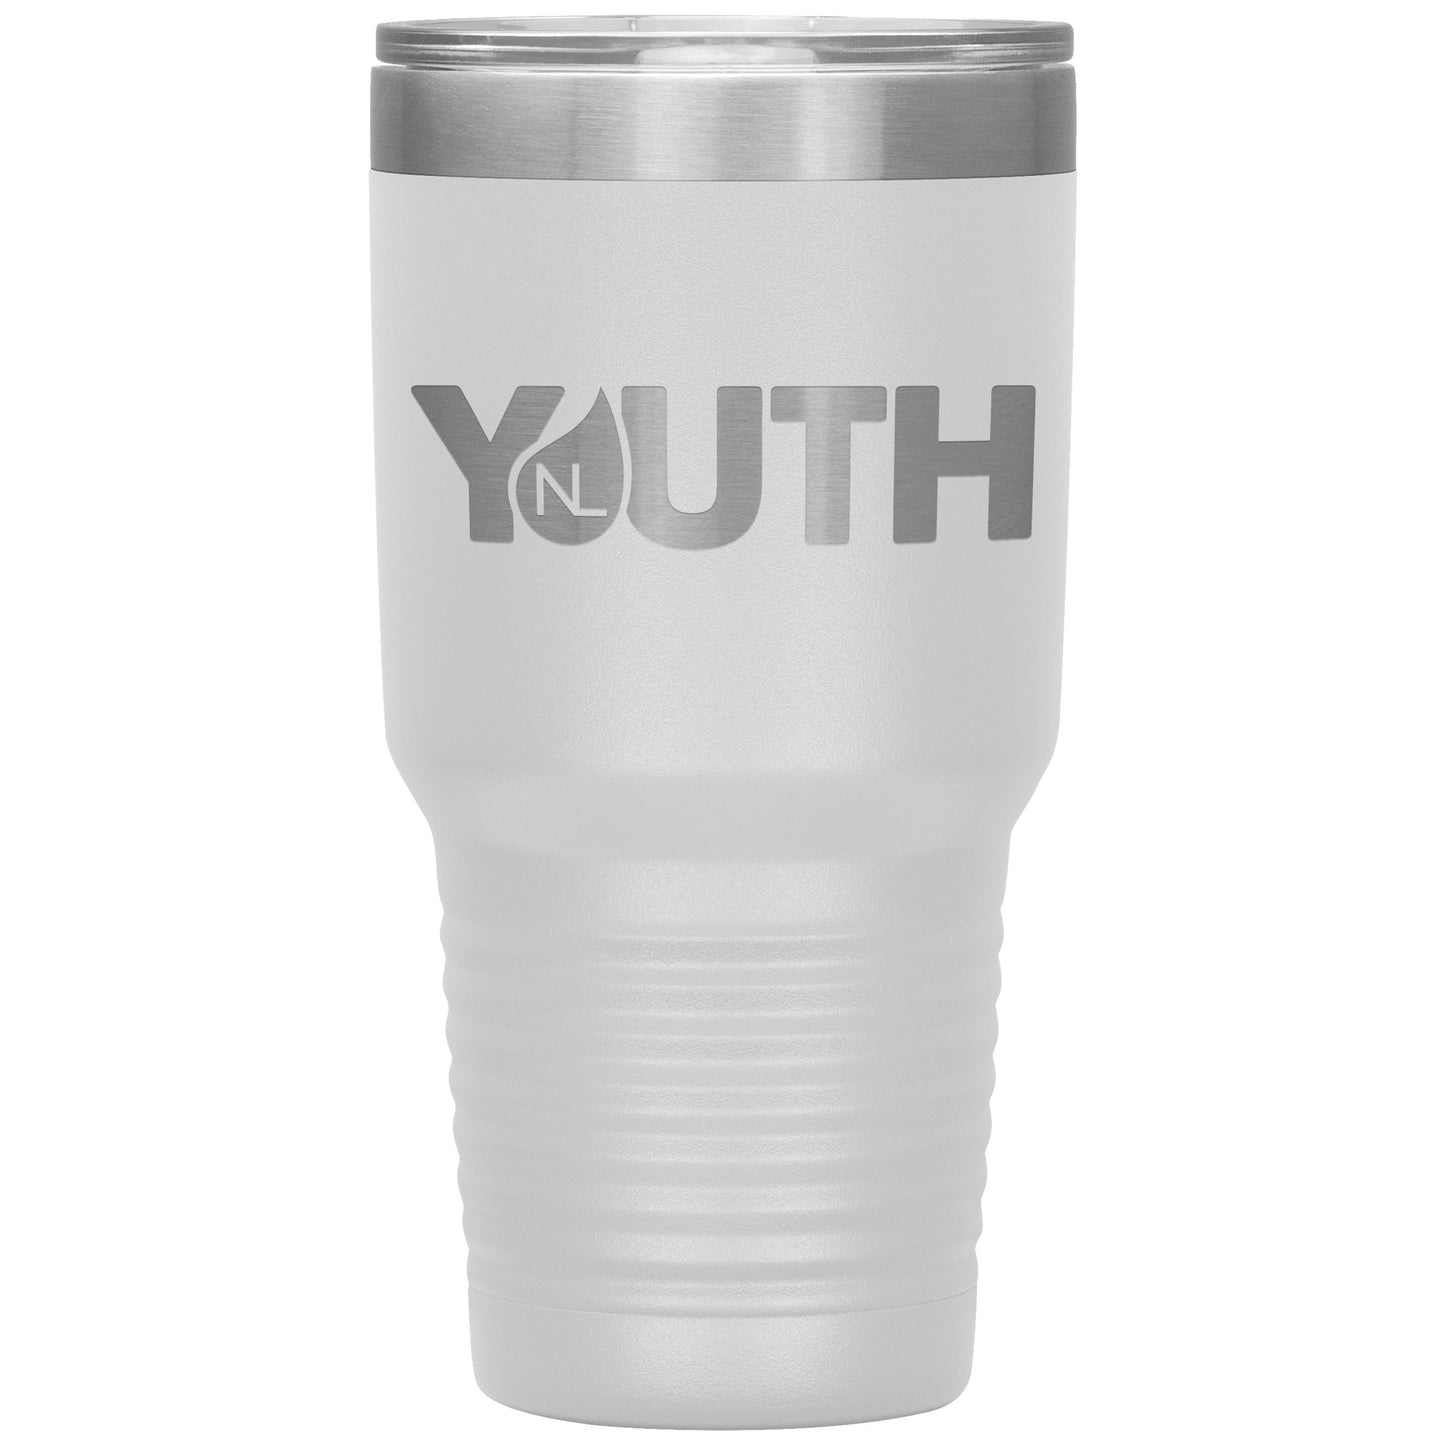 New Life YOUTH - Insulated Tumblers